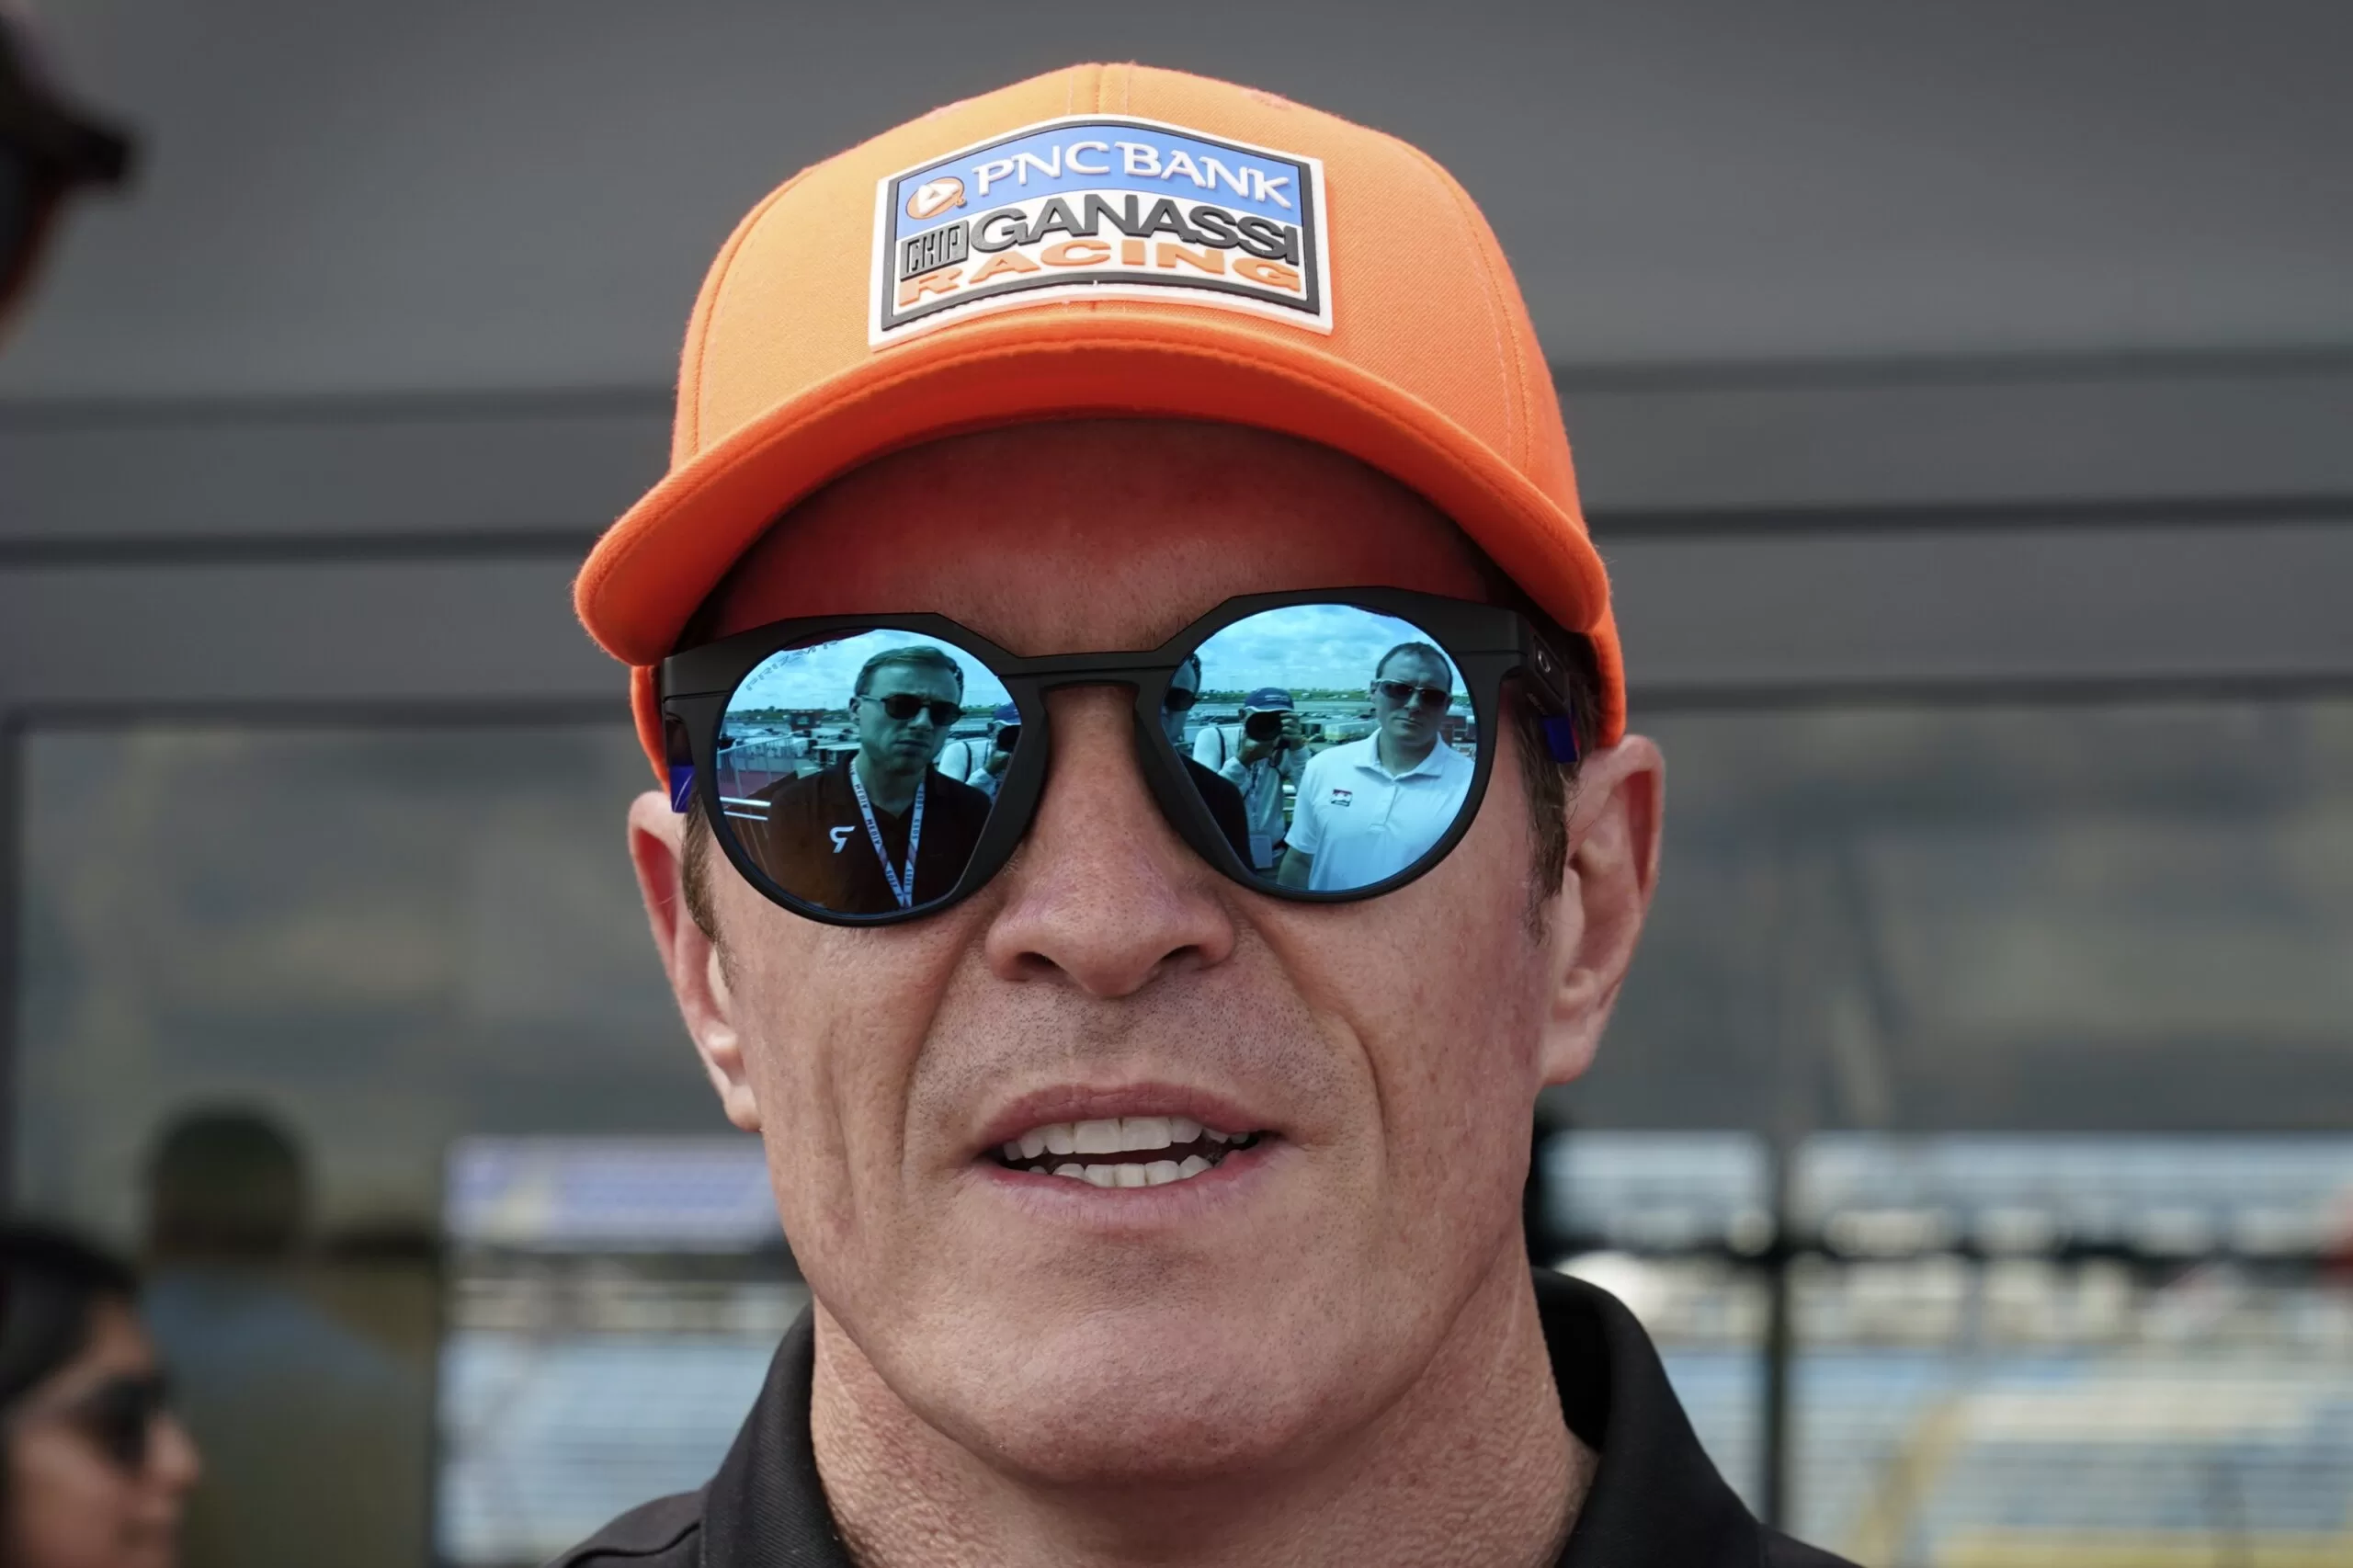 Scott Dixon didn’t expect much as a young New Zealand racer. The Iceman is now IndyCar’s Ironman
